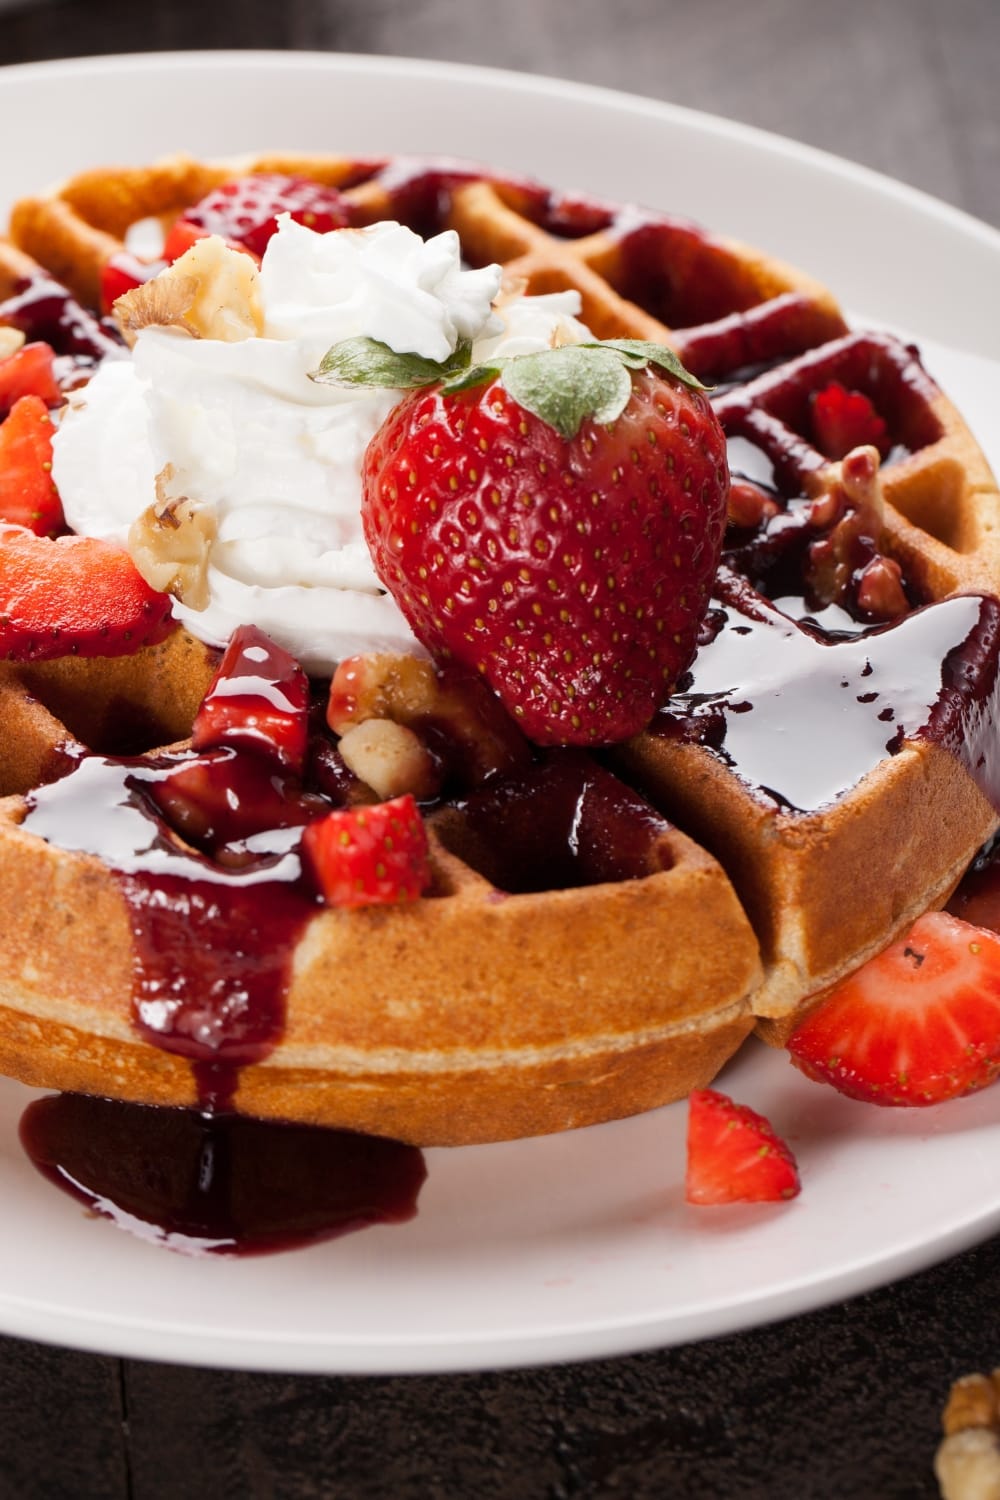 Mouthwatering Belgian Waffles With Strawberries and Whipped Cream